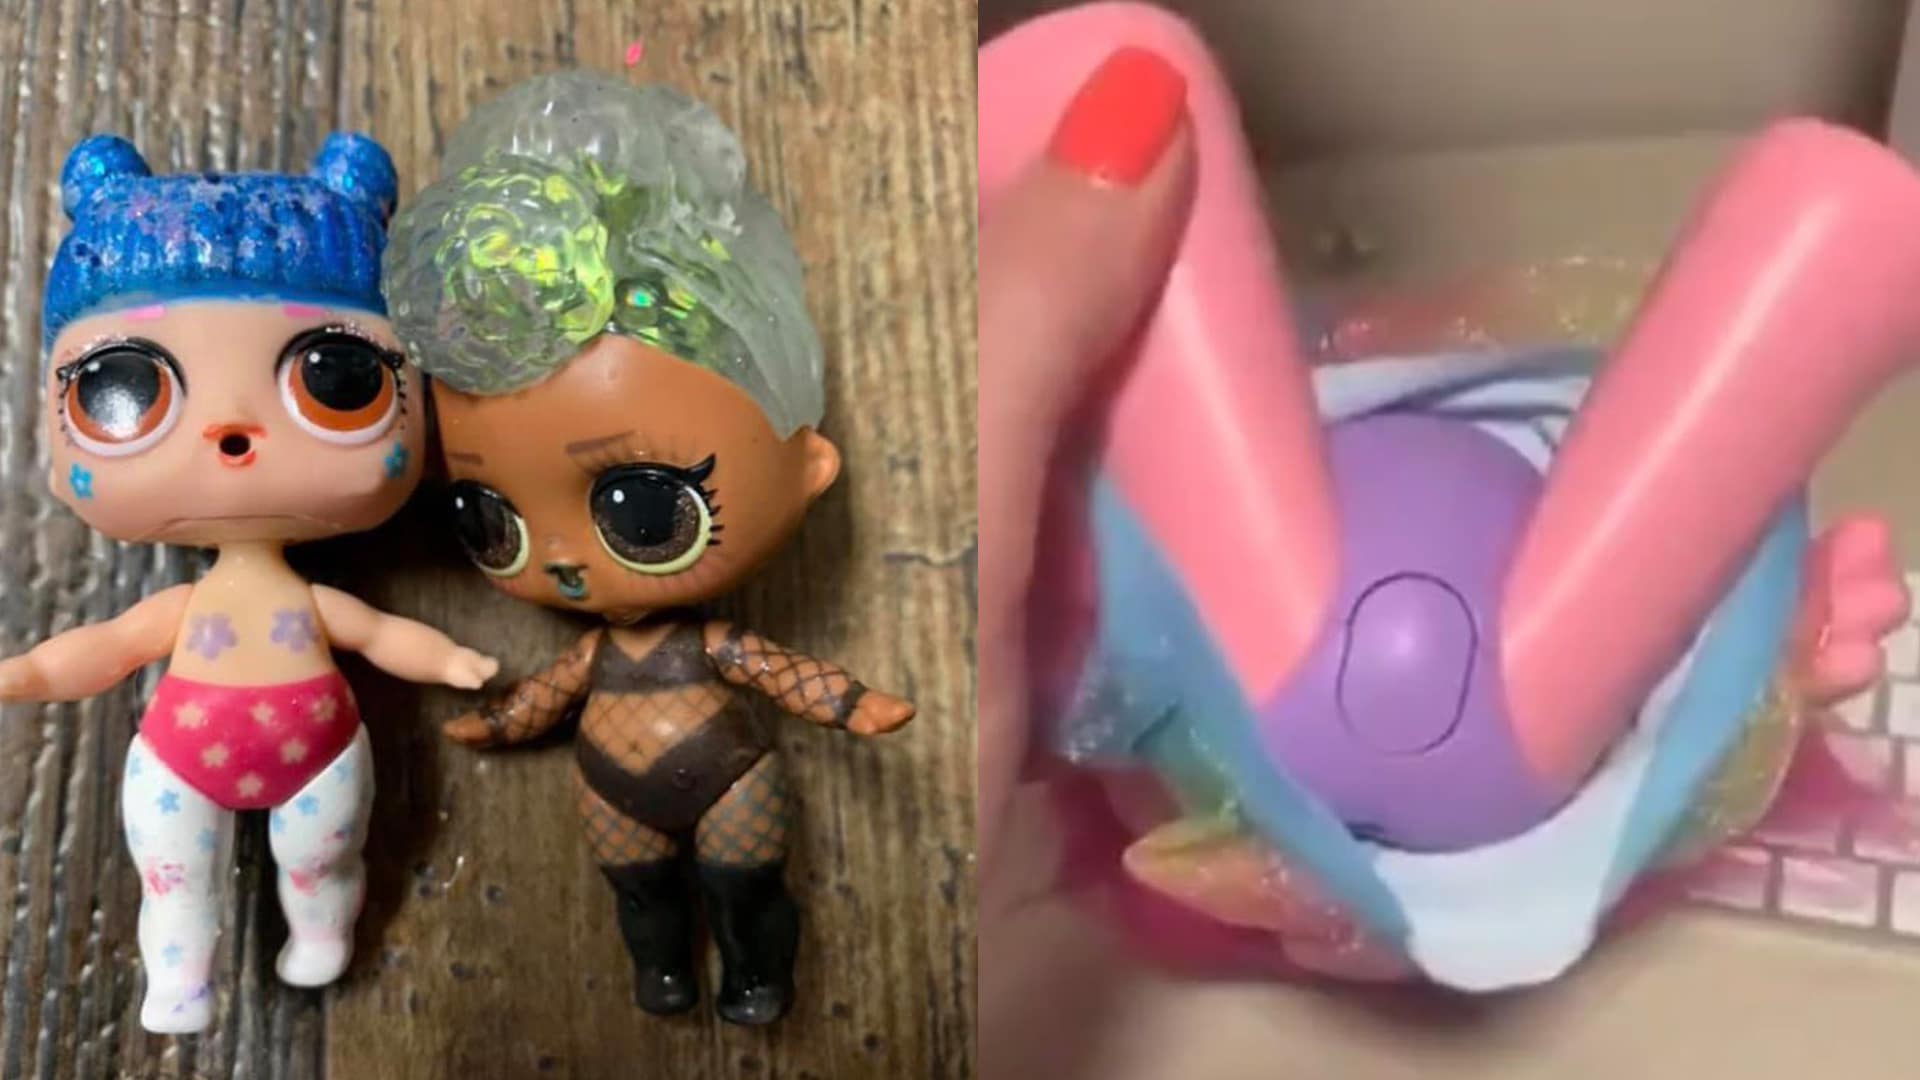 TikTok Moms Outraged at Inappropriate LOL Dolls After Viral Videos